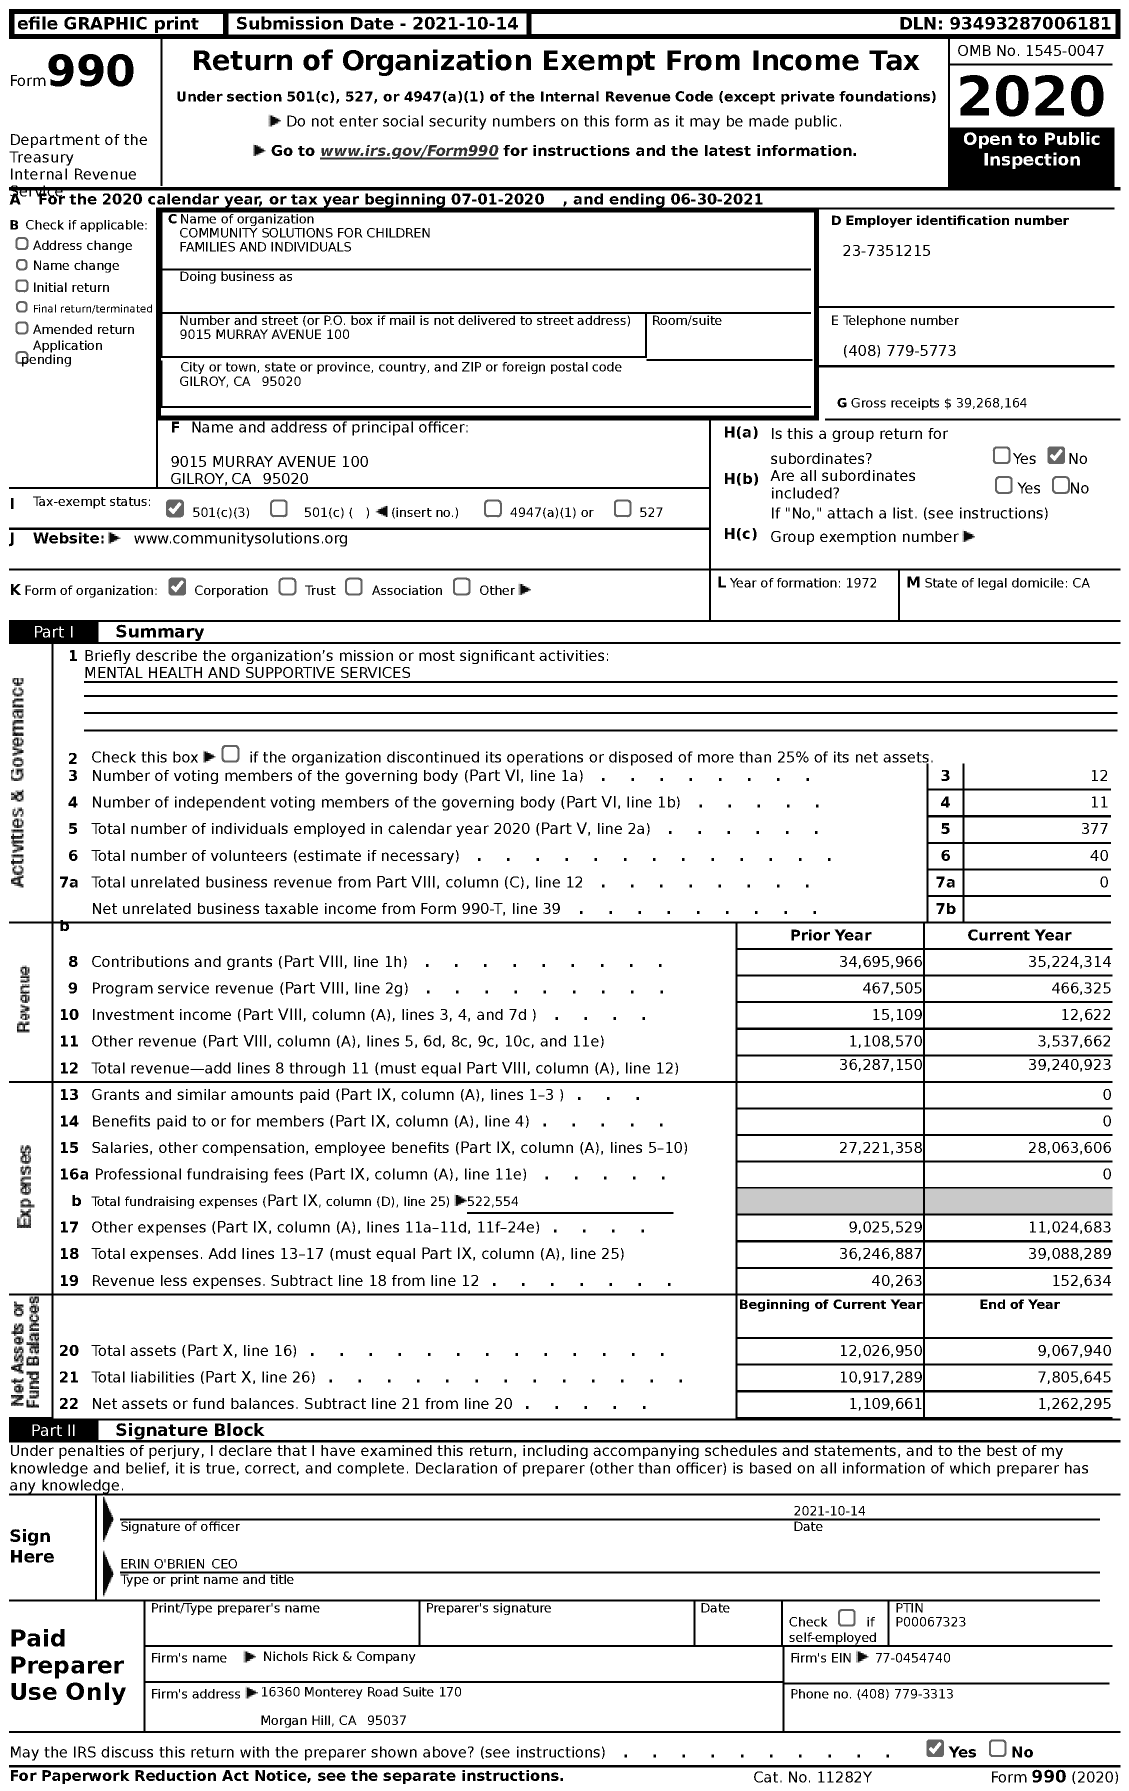 Image of first page of 2020 Form 990 for Community Solutions for Children Families and Individuals